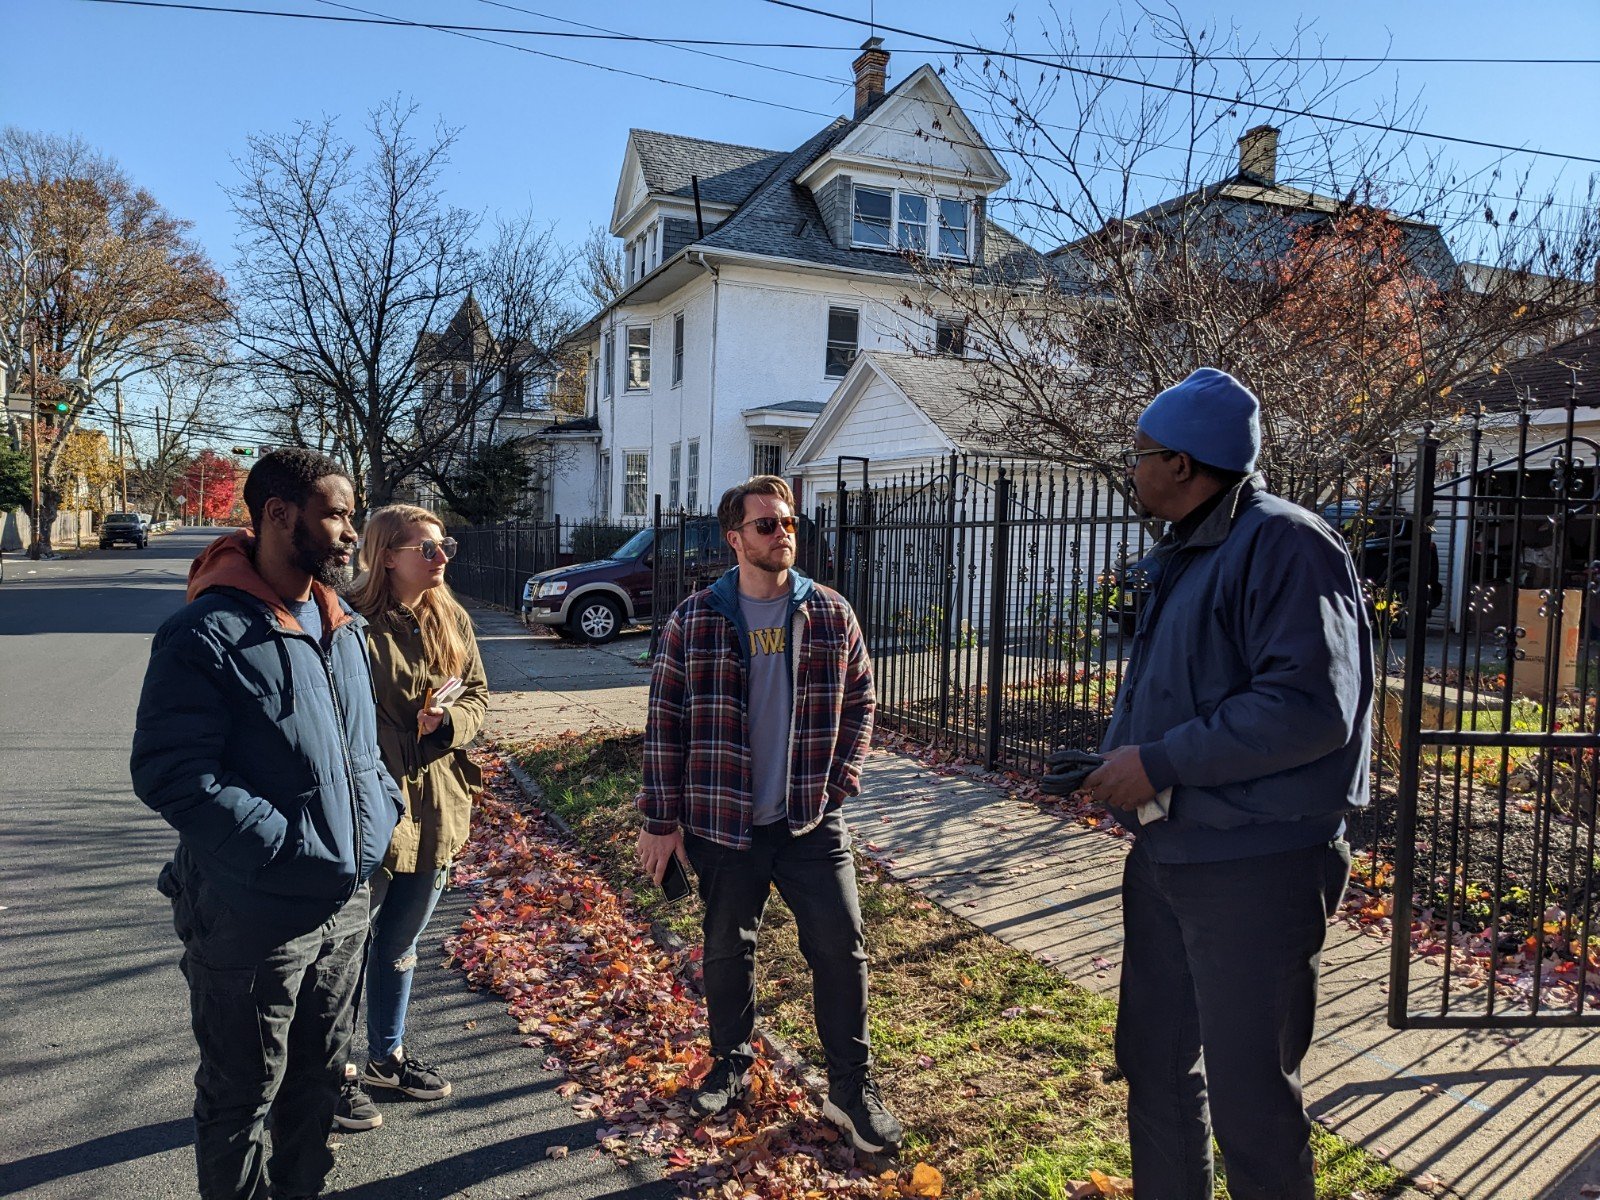 DPS students Ibrahim Waziri, Renee Wolf, and Jesse Weber talking with Charles, a Newark Resident (photo credit Joseph Conte)